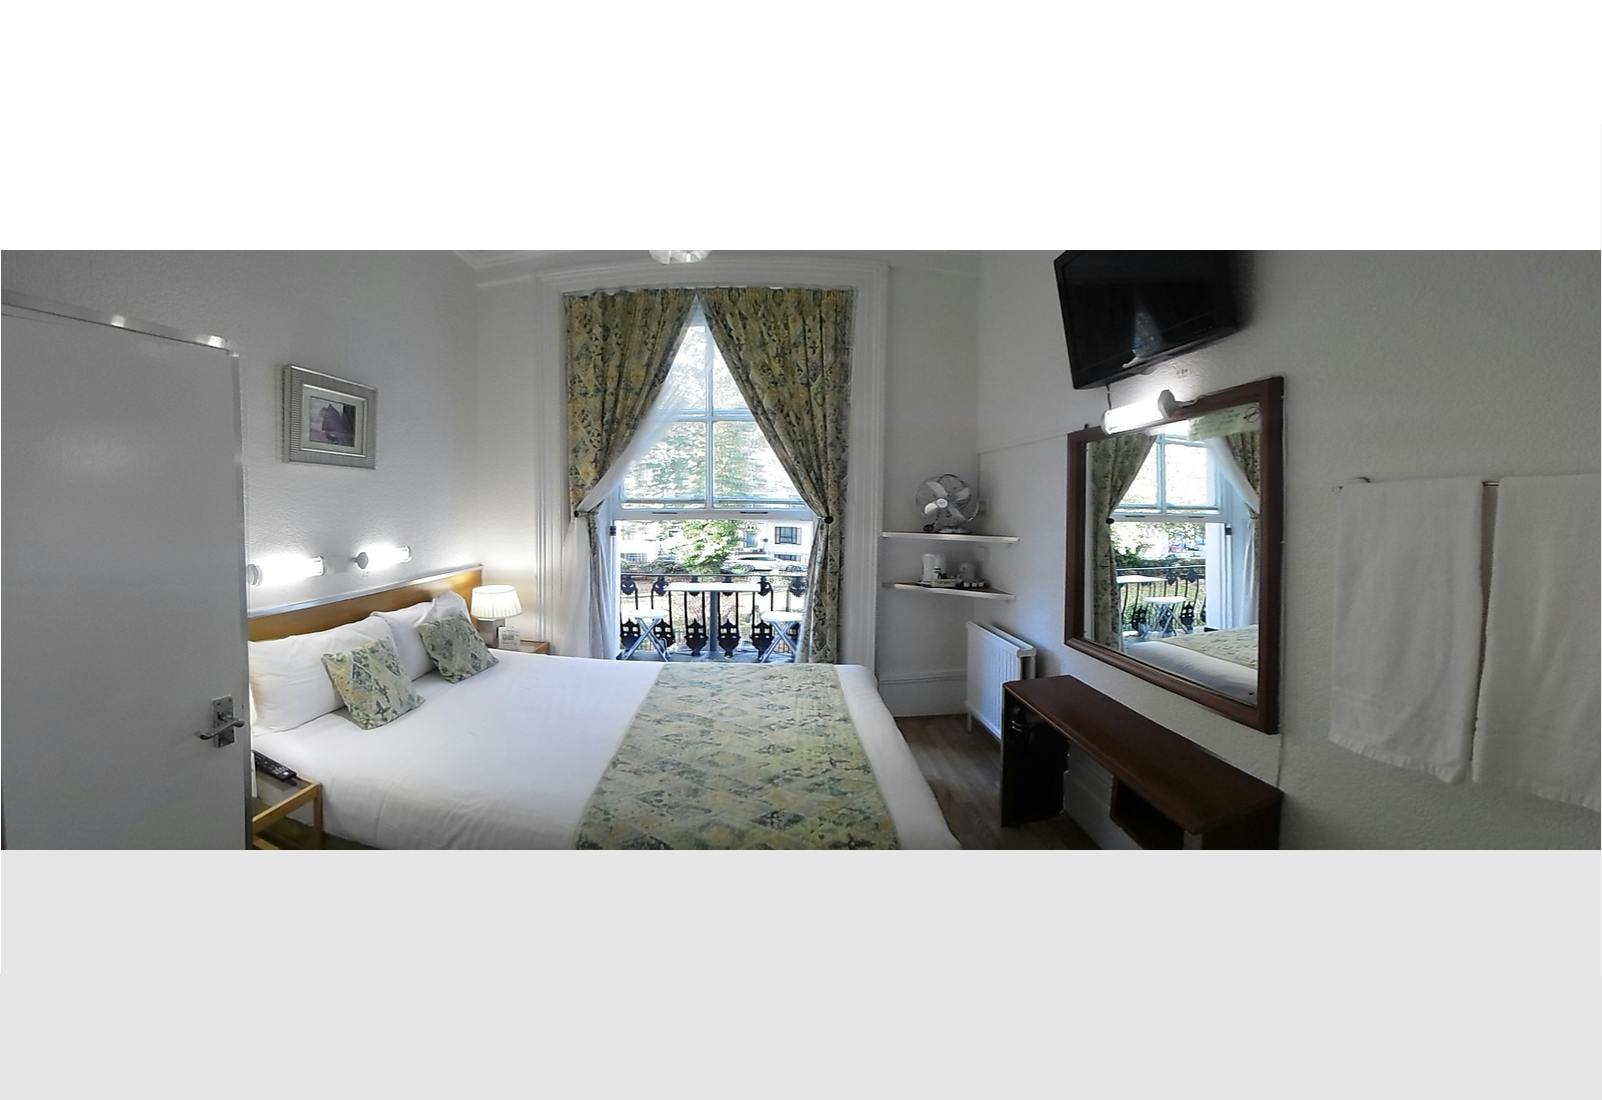 Boutique Hotel central London B&B Accommodationdouble room